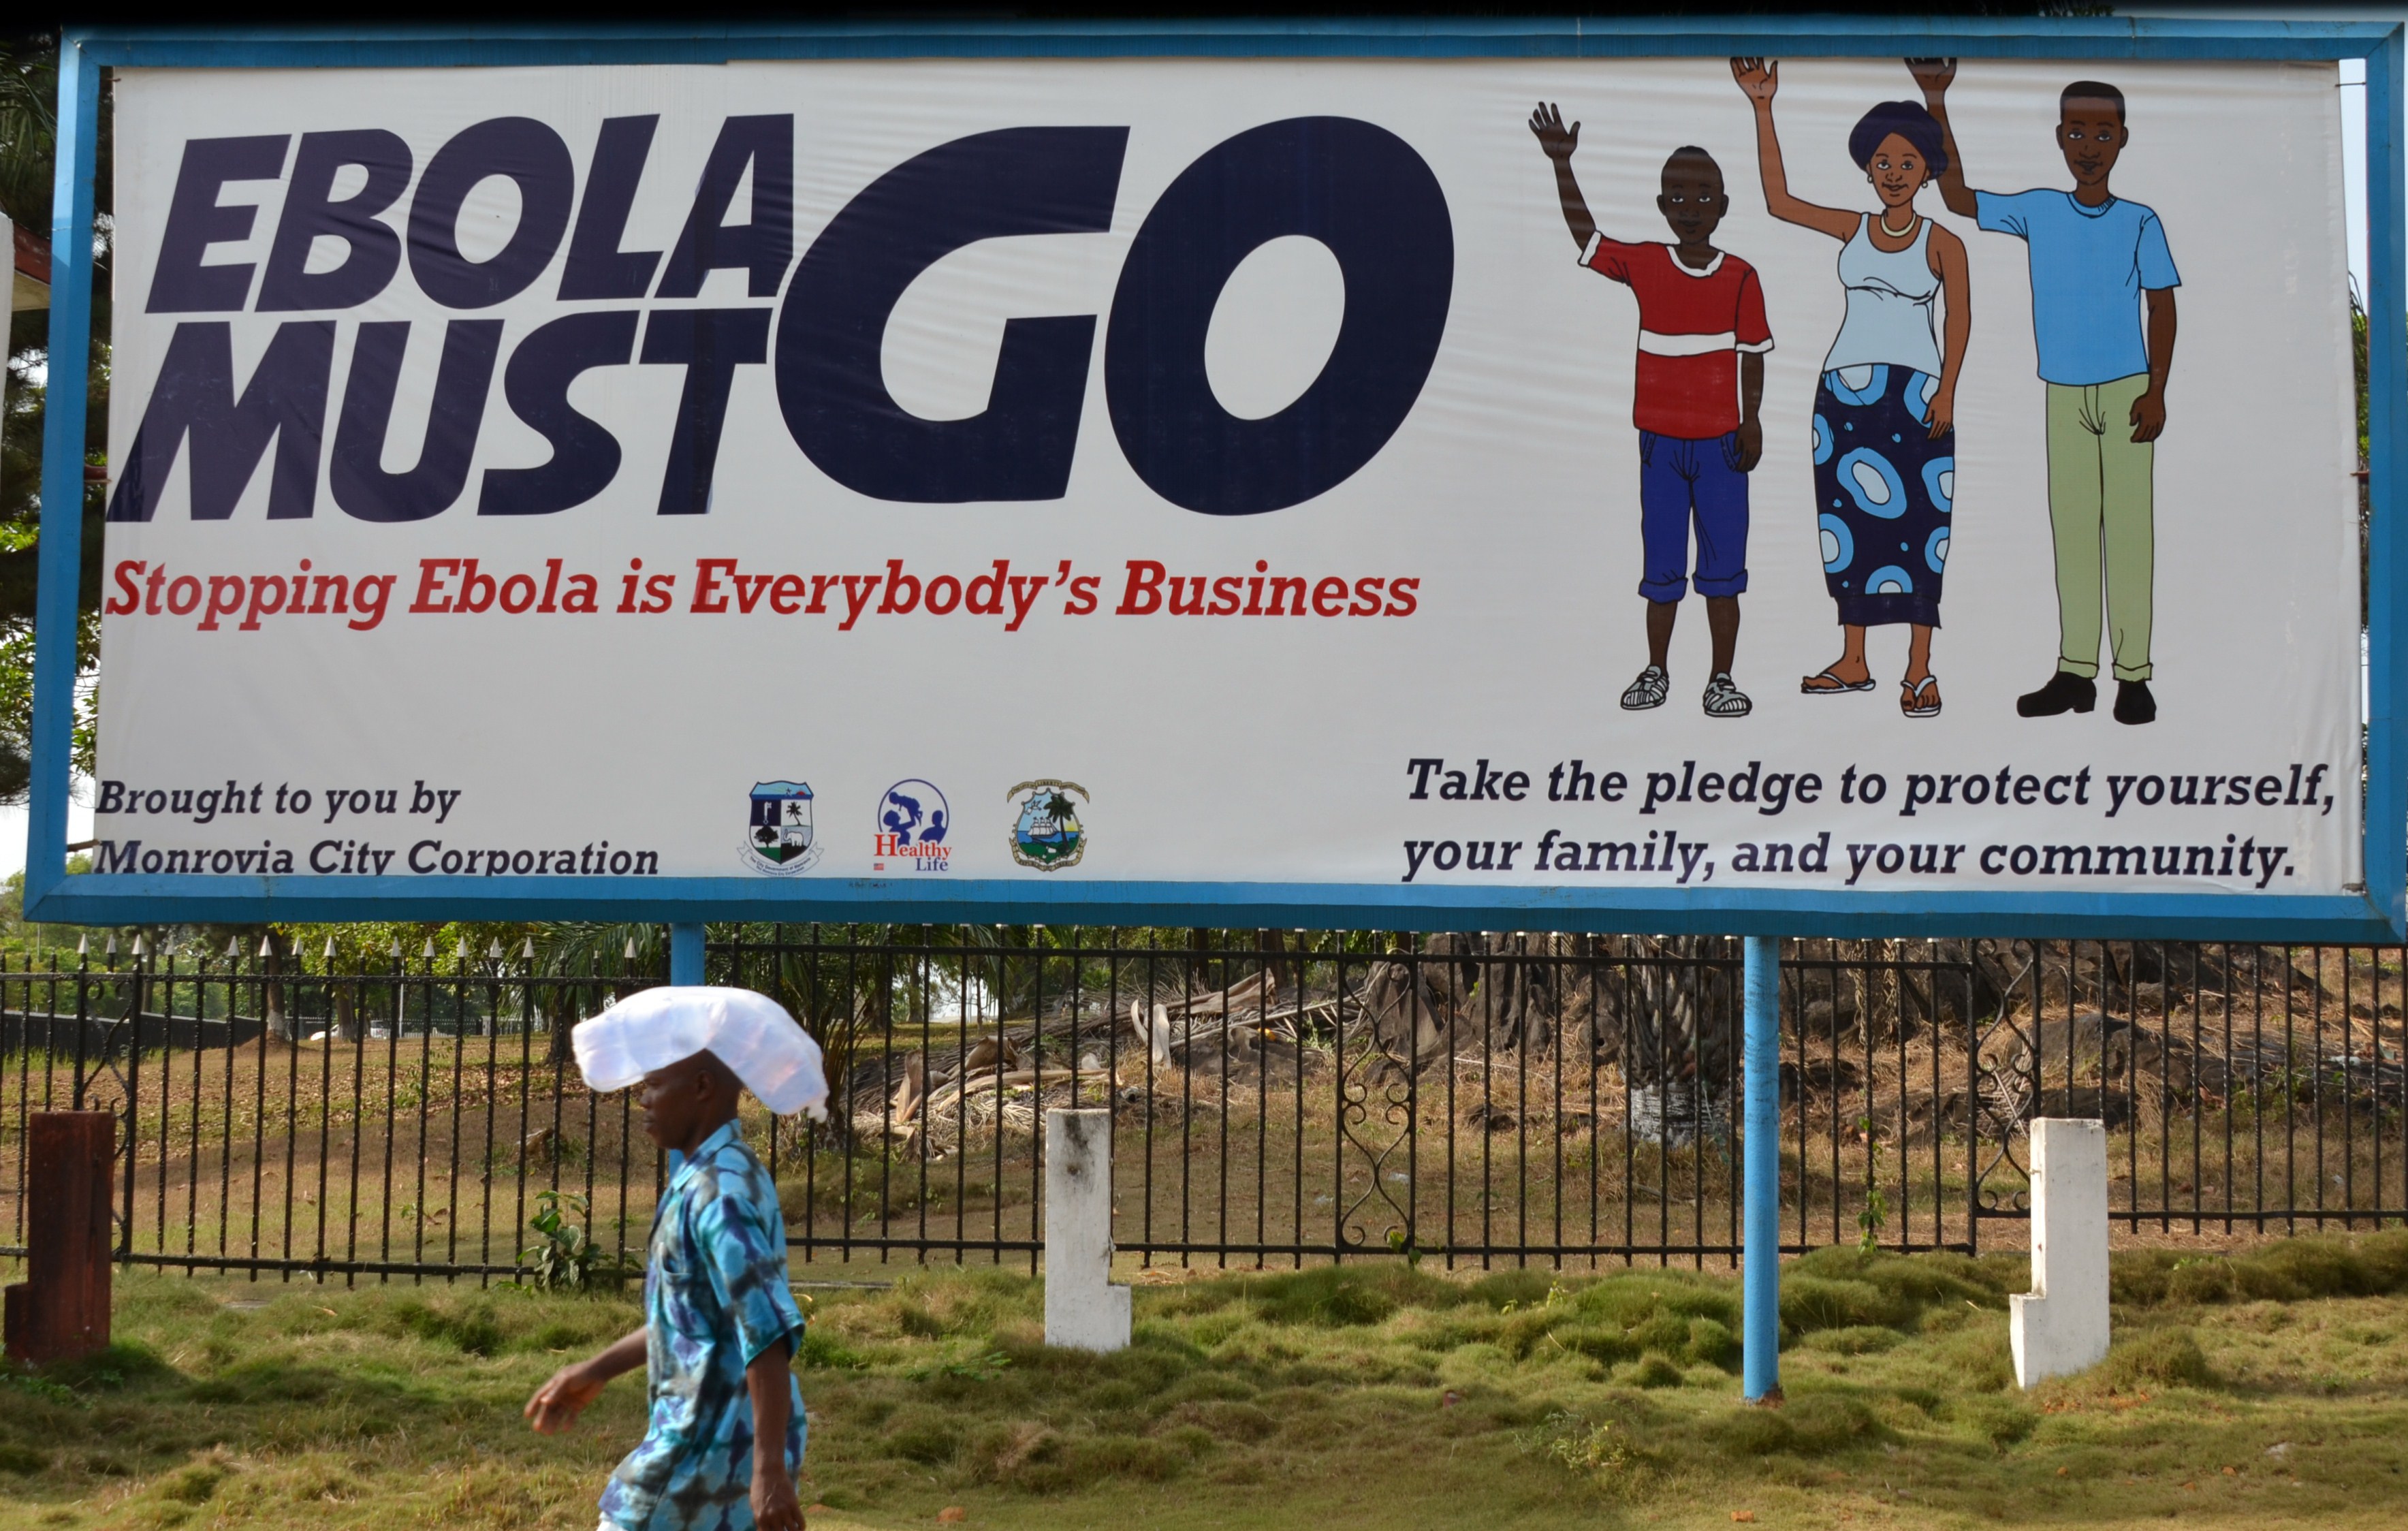 A man walks past an ebola campaign banner with the new slogan "Ebola Must GO" in Monrovia, Liberia on Feb. 23, 2015. (Zoom Dosso—AFP/Getty Images)